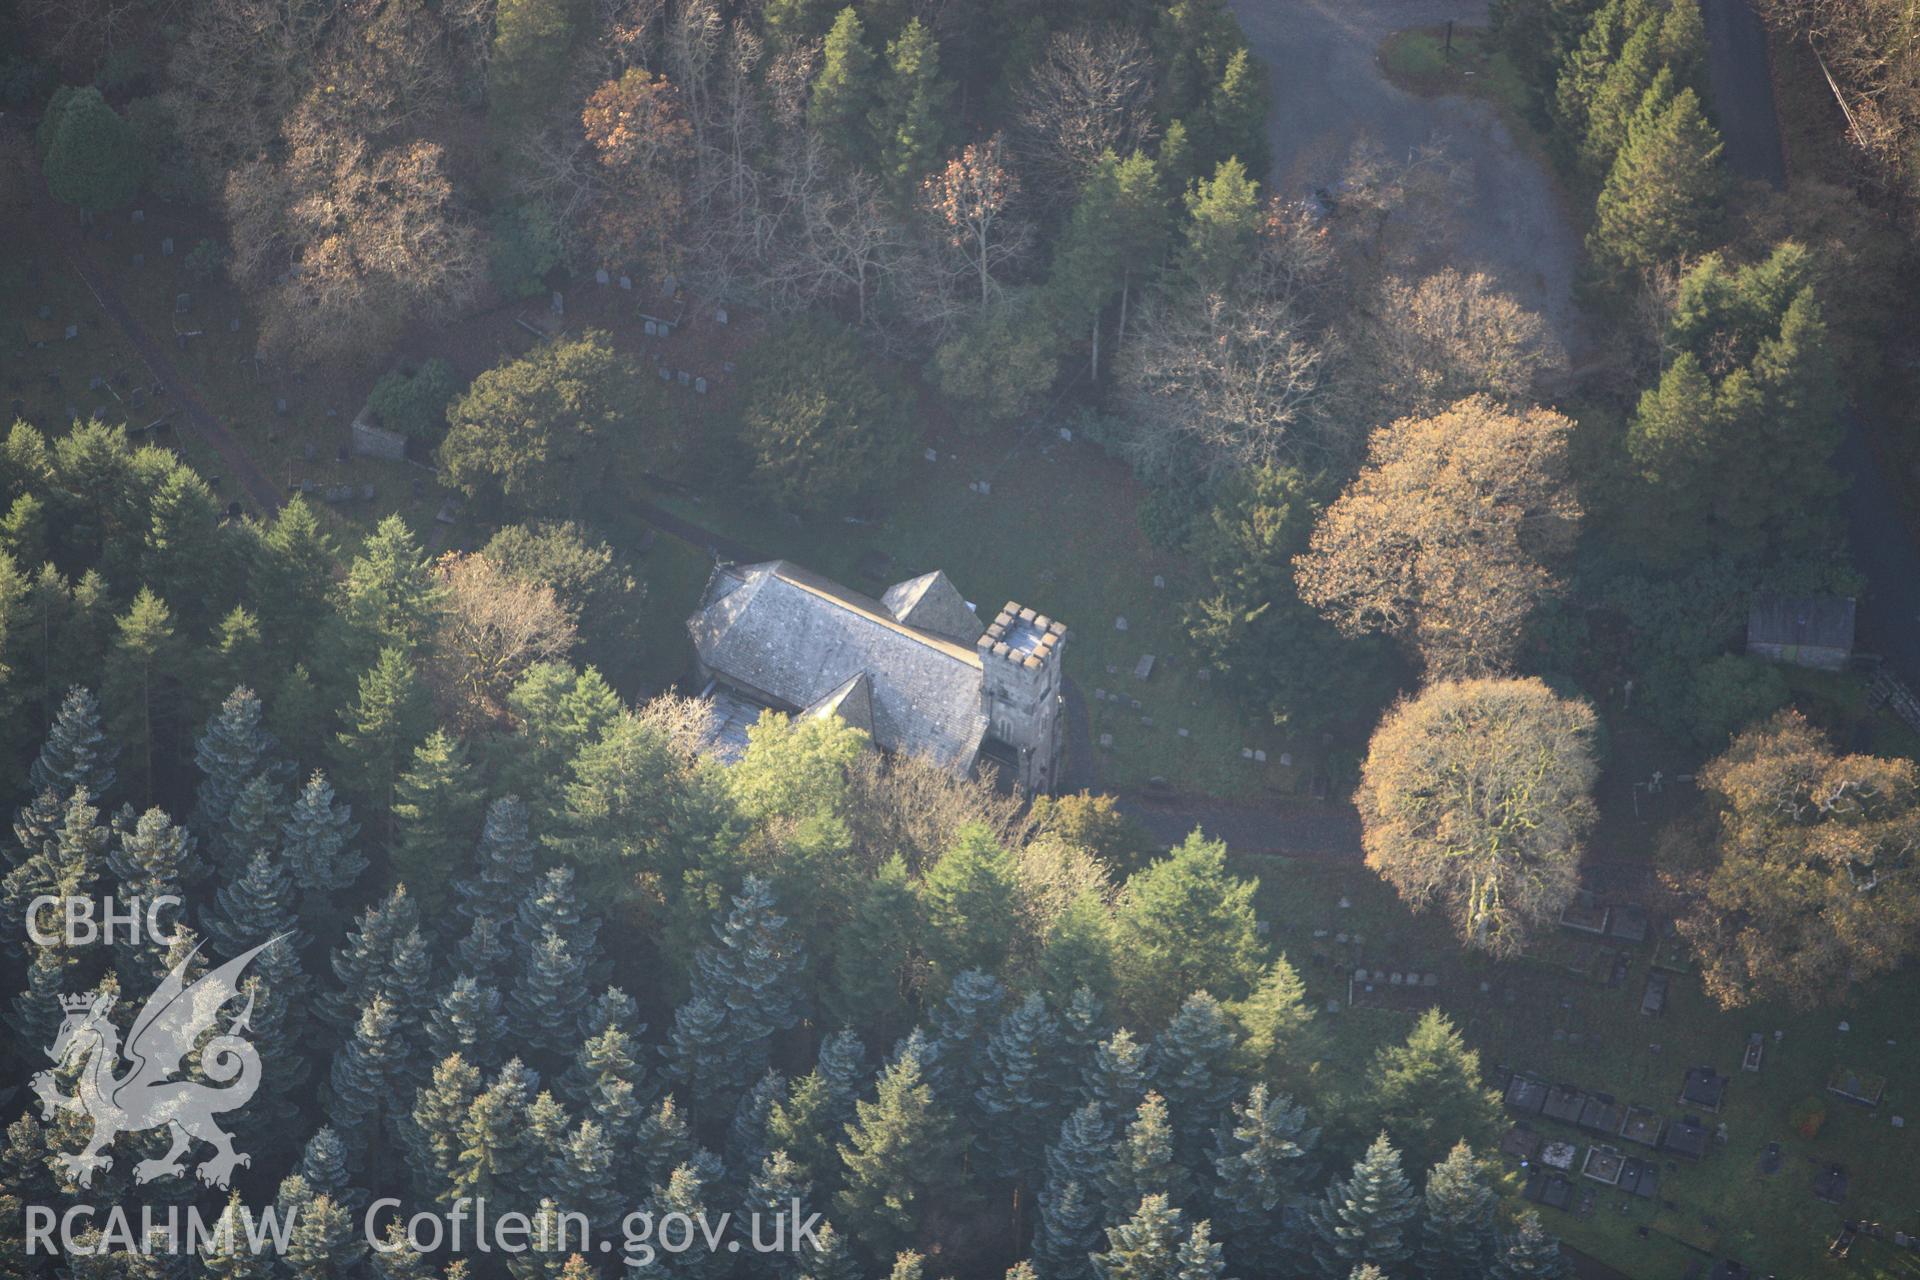 RCAHMW colour oblique aerial photograph of Hafod Uchtryd Church. Taken on 09 November 2009 by Toby Driver